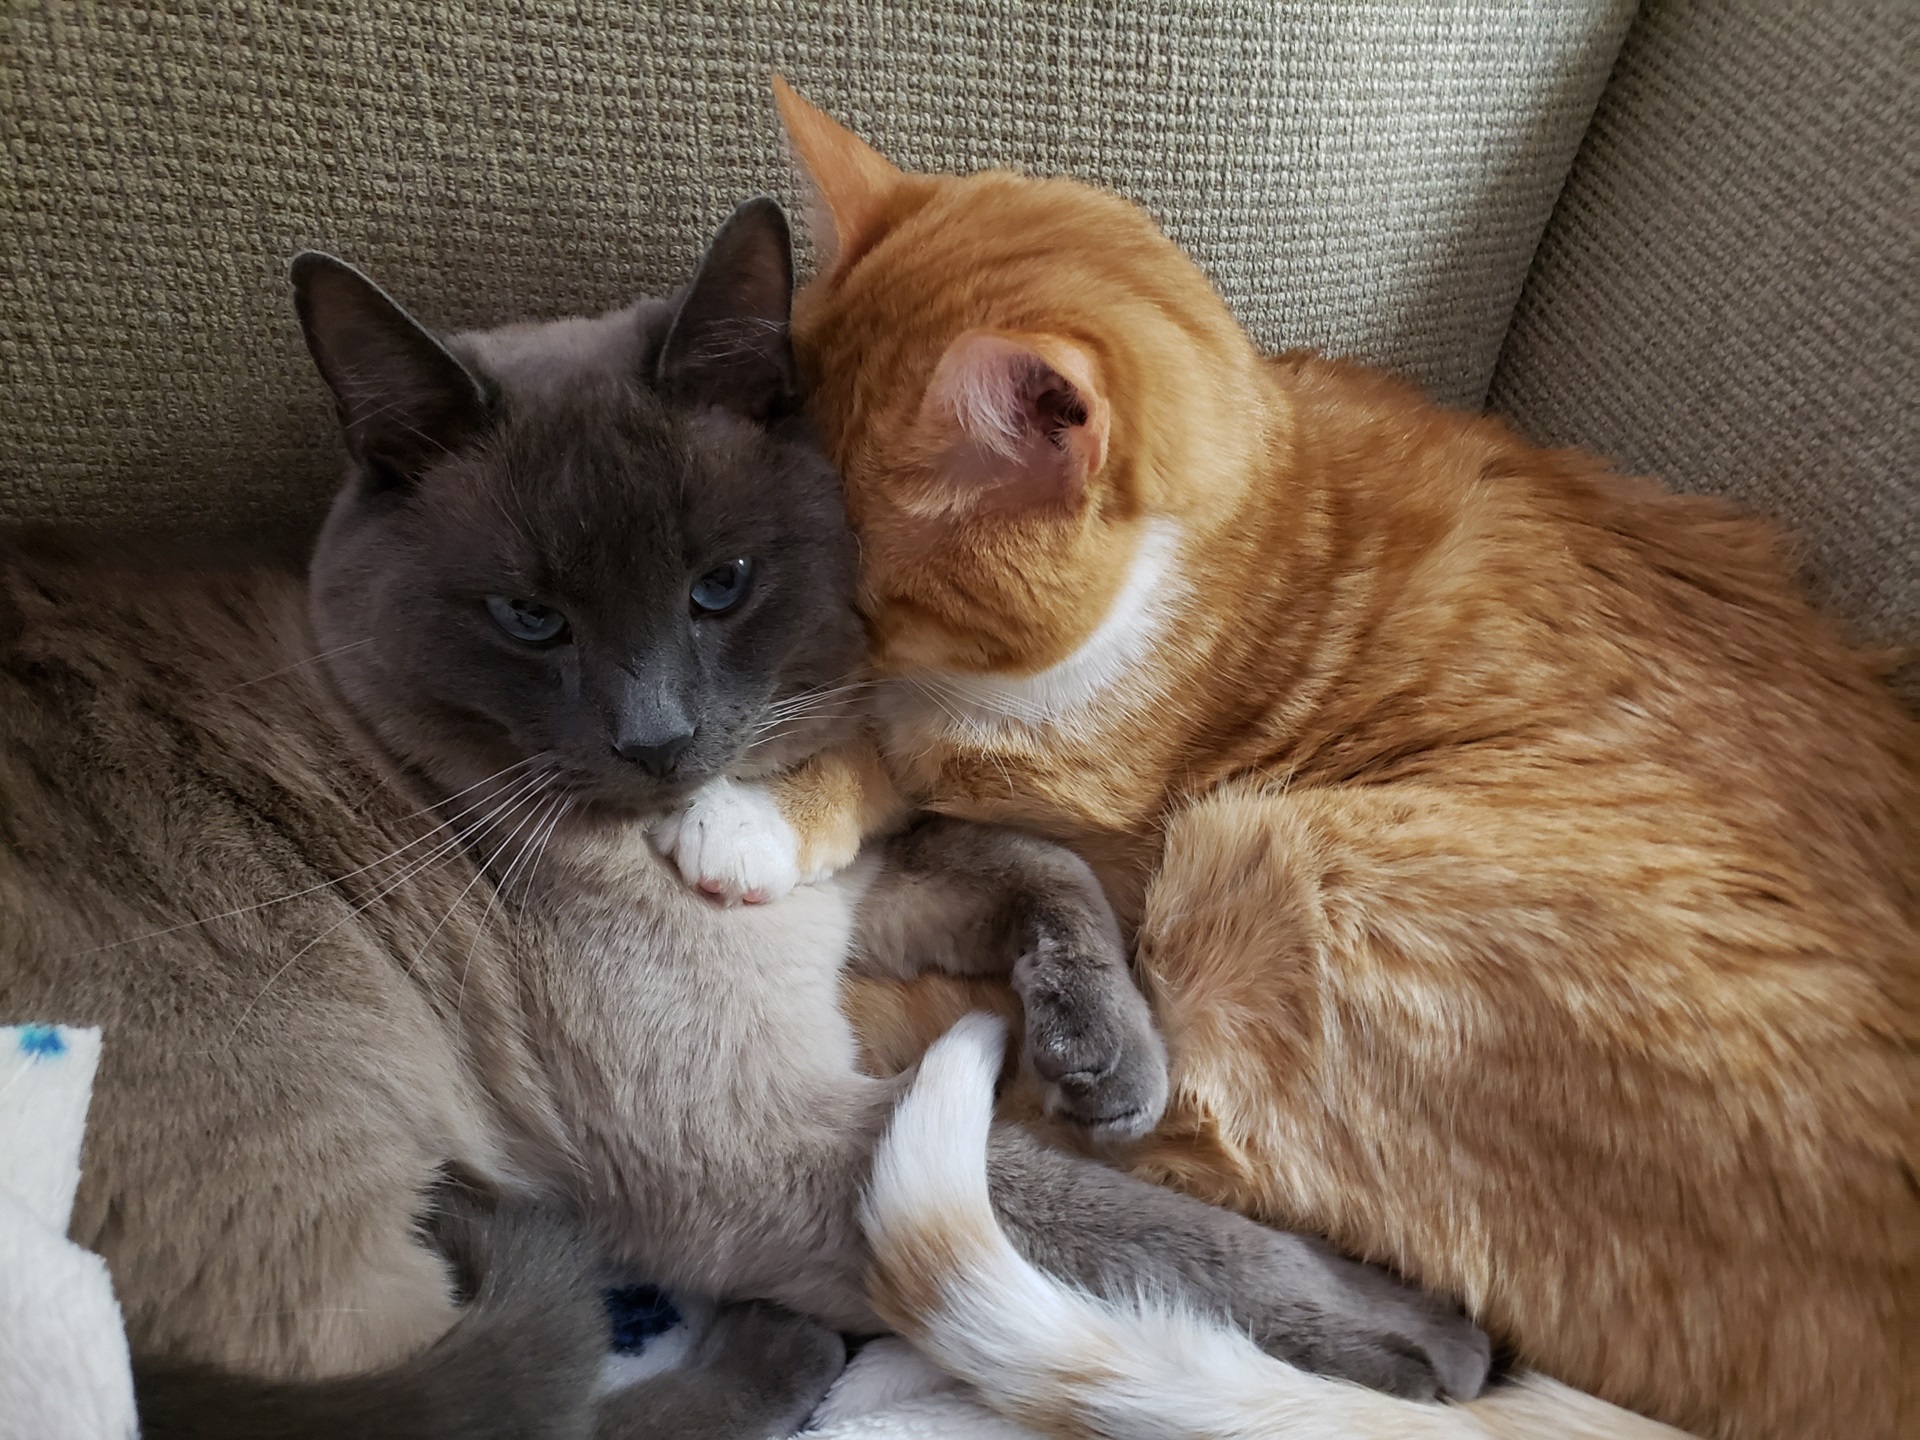 An orange cat and Siamese cat snuggle together on the couch 